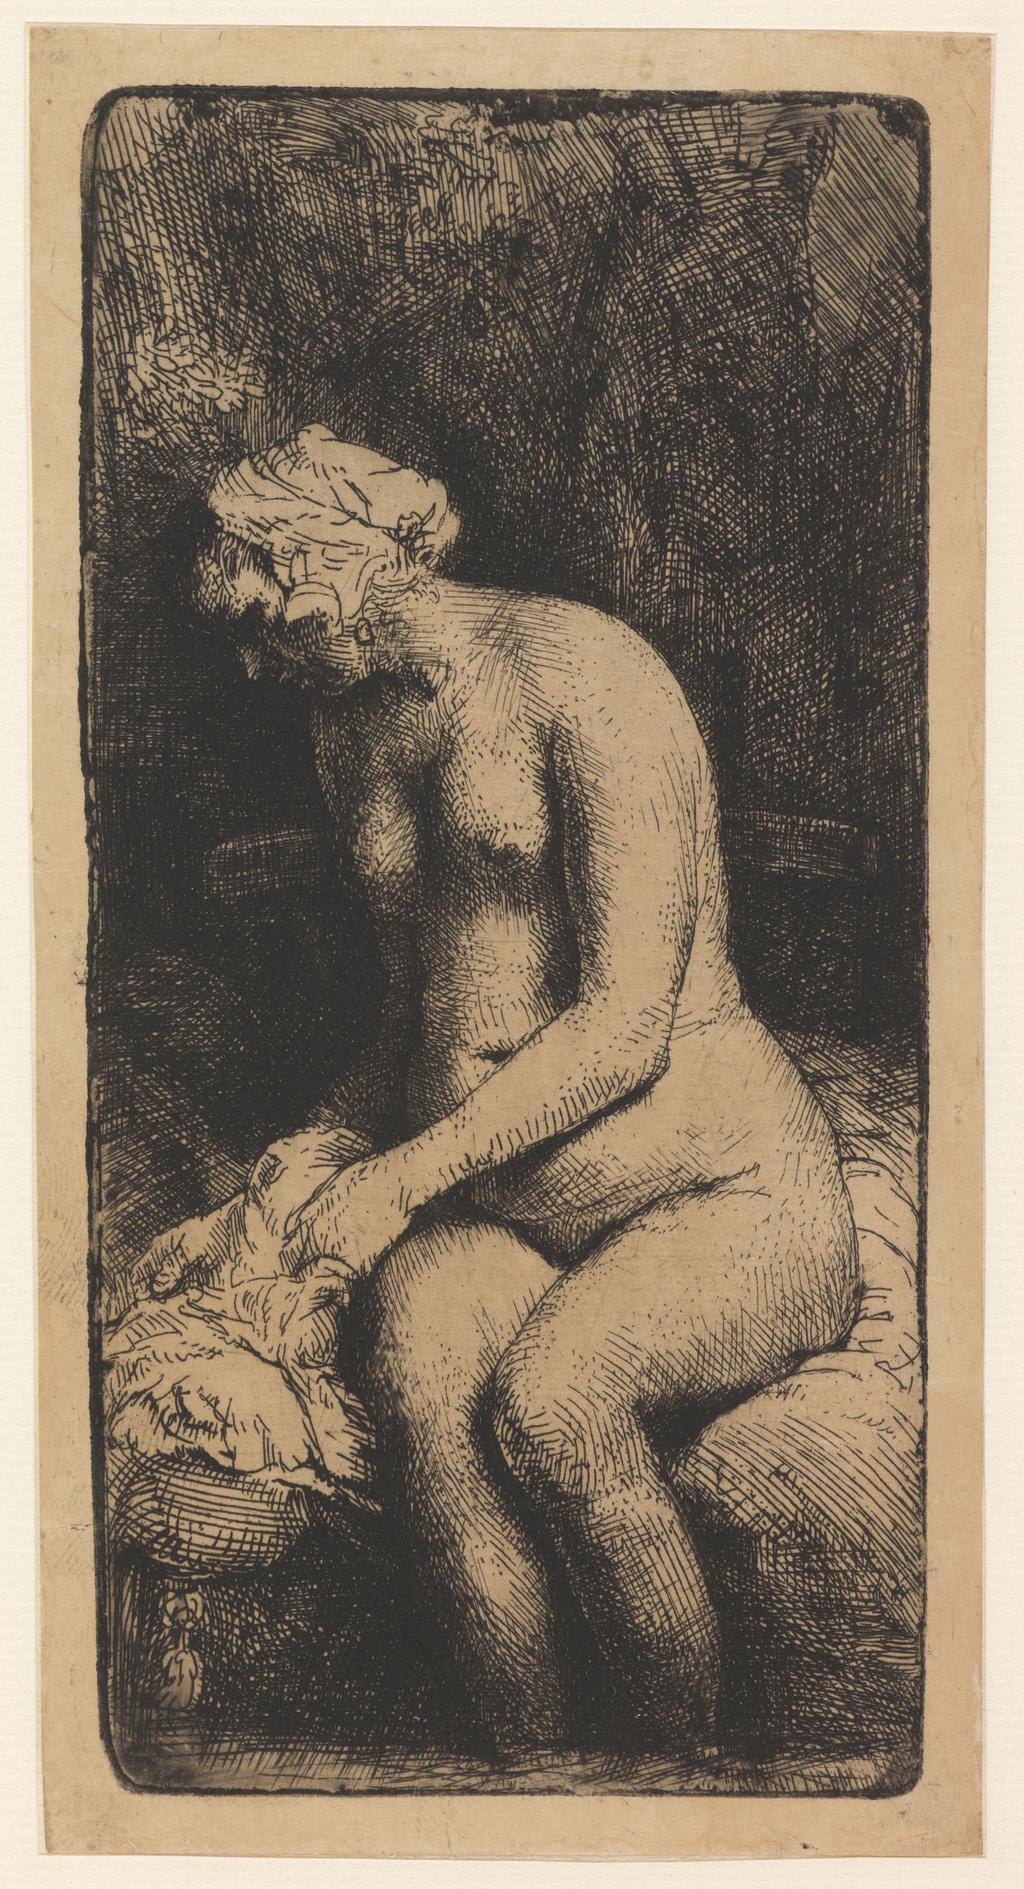 An image of Woman bathing her feet at a brook. Rembrandt Harmensz. van Rijn (Dutch, 1606-1669). Etching, drypoint, engraving, surface tone, black carbon ink on thick vellum-like Oriental paper, probably Japanese, height, plate, 160 mm, width, plate, 79 mm; height, sheet, 171 mm, width, sheet, 89 mm, 1658. Production Note: Only state. Alternative Number(s): Hollstein (Dutch/Flemish); B200. Biörklund/Barnard; BB58-D. Lugt; 2475.